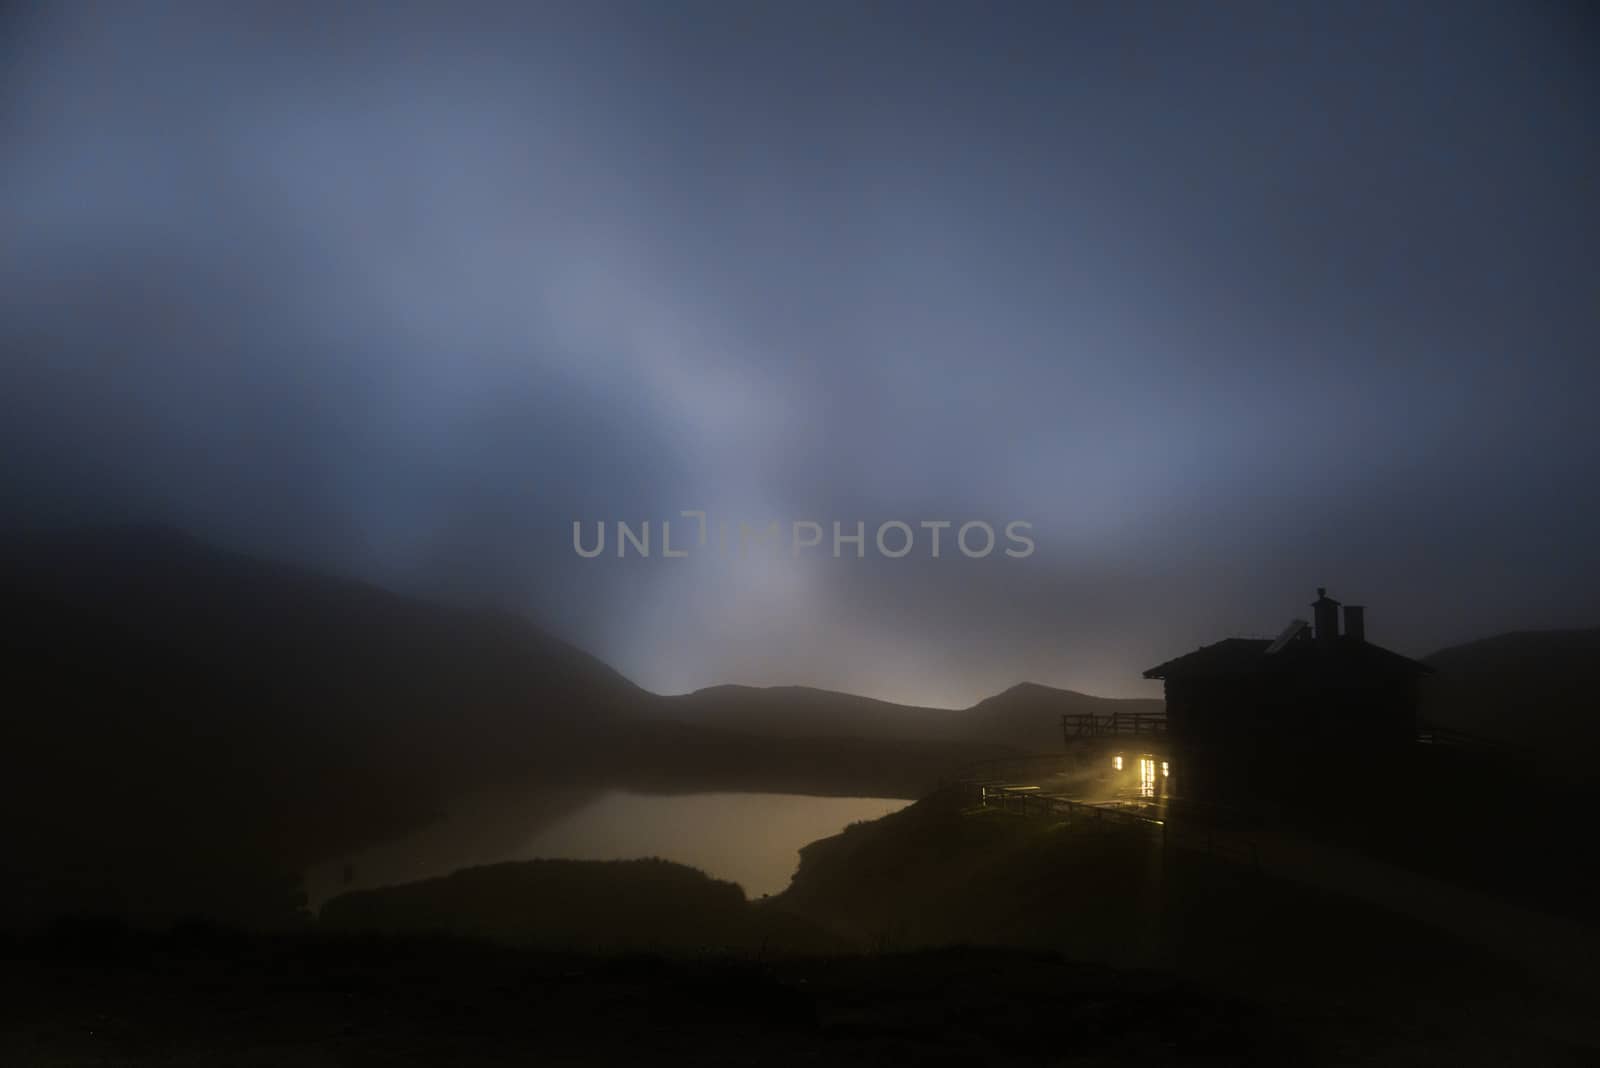 Mountain hut in the foggy night, Dolomites by Mdc1970